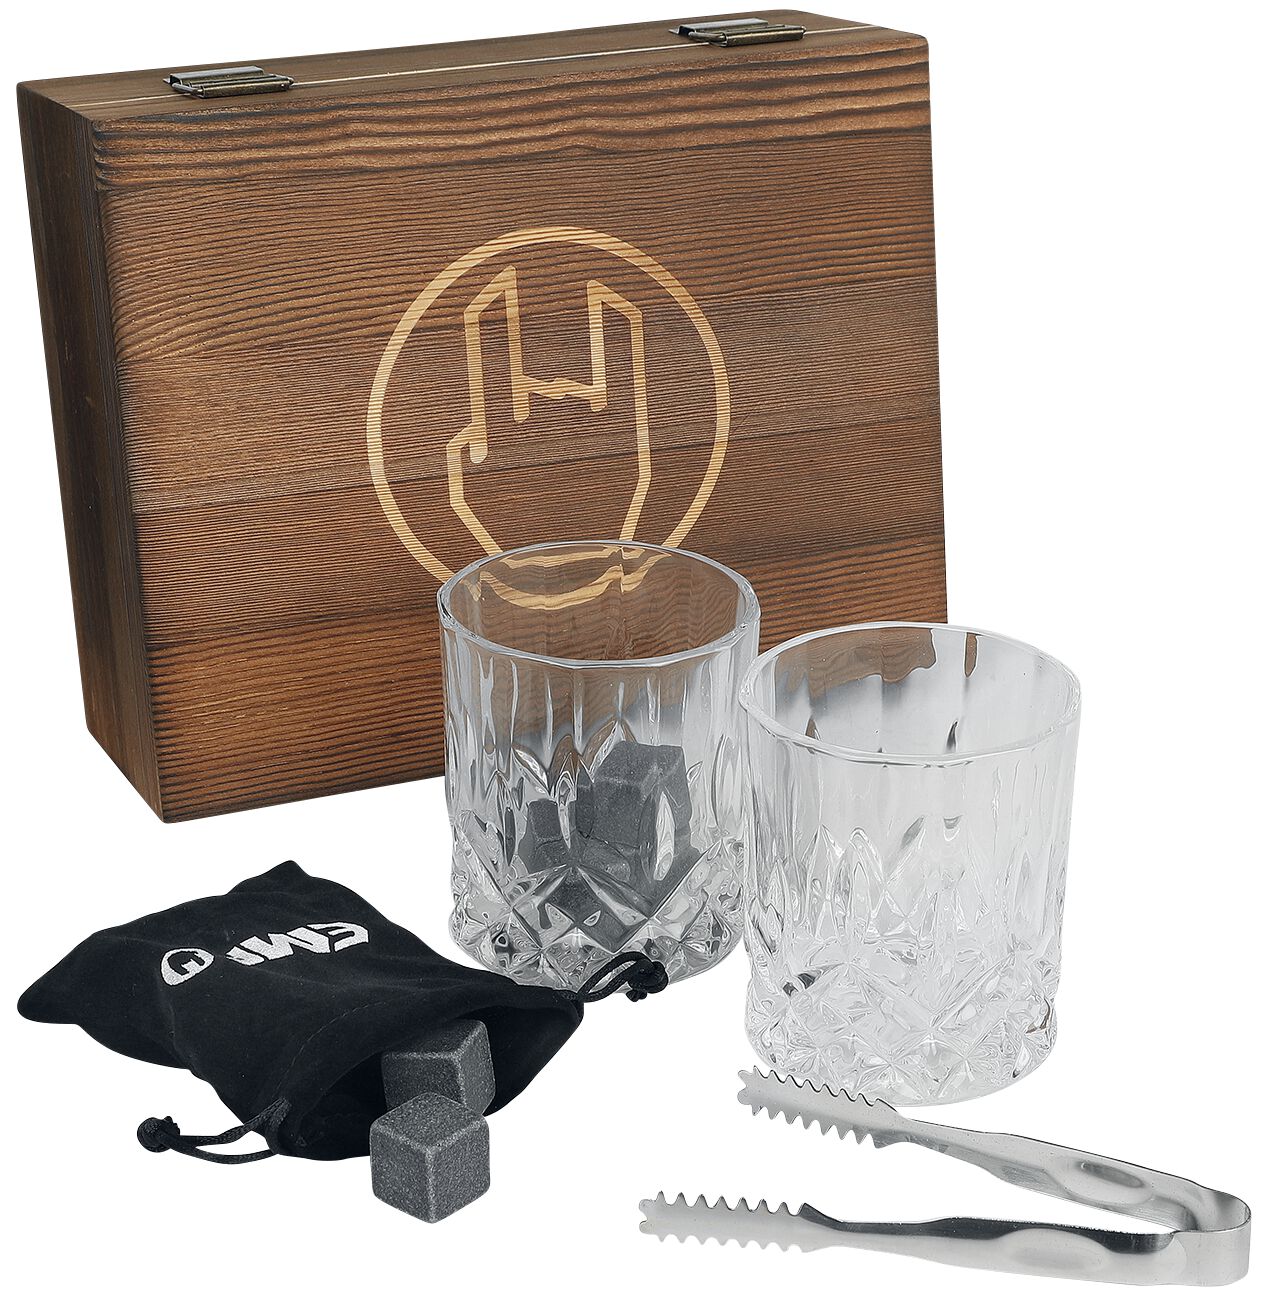 EMP Special Collection Whisky Set Whiskyglas multicolor 10054444 -001